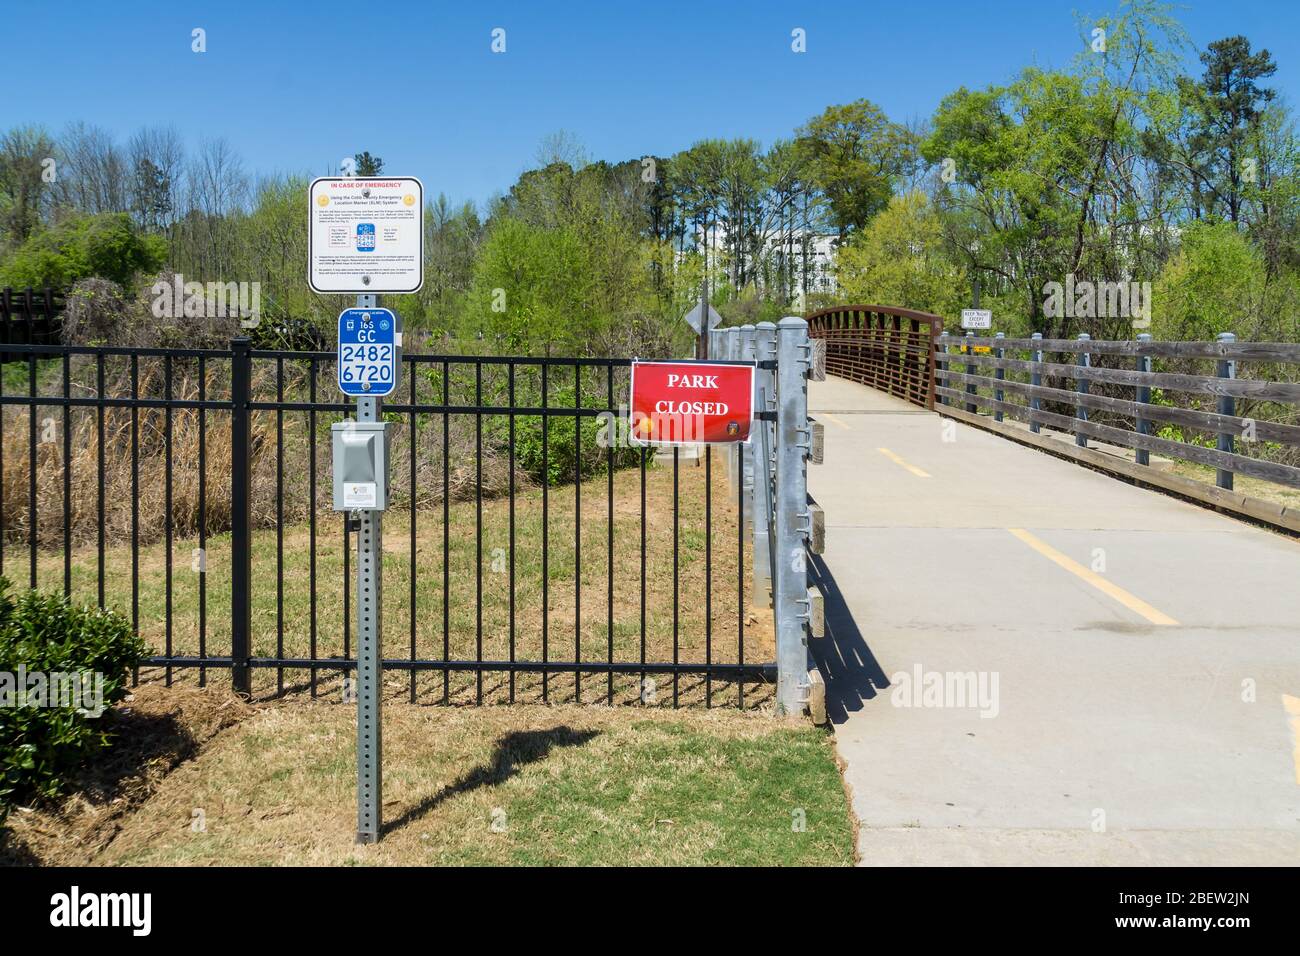 Kennesaw, GA / USA - 04/03/20: Park closed sign at Cobb County park during mandatory stay at home shelter in place order passed for Covid-19 Corona Vi Stock Photo